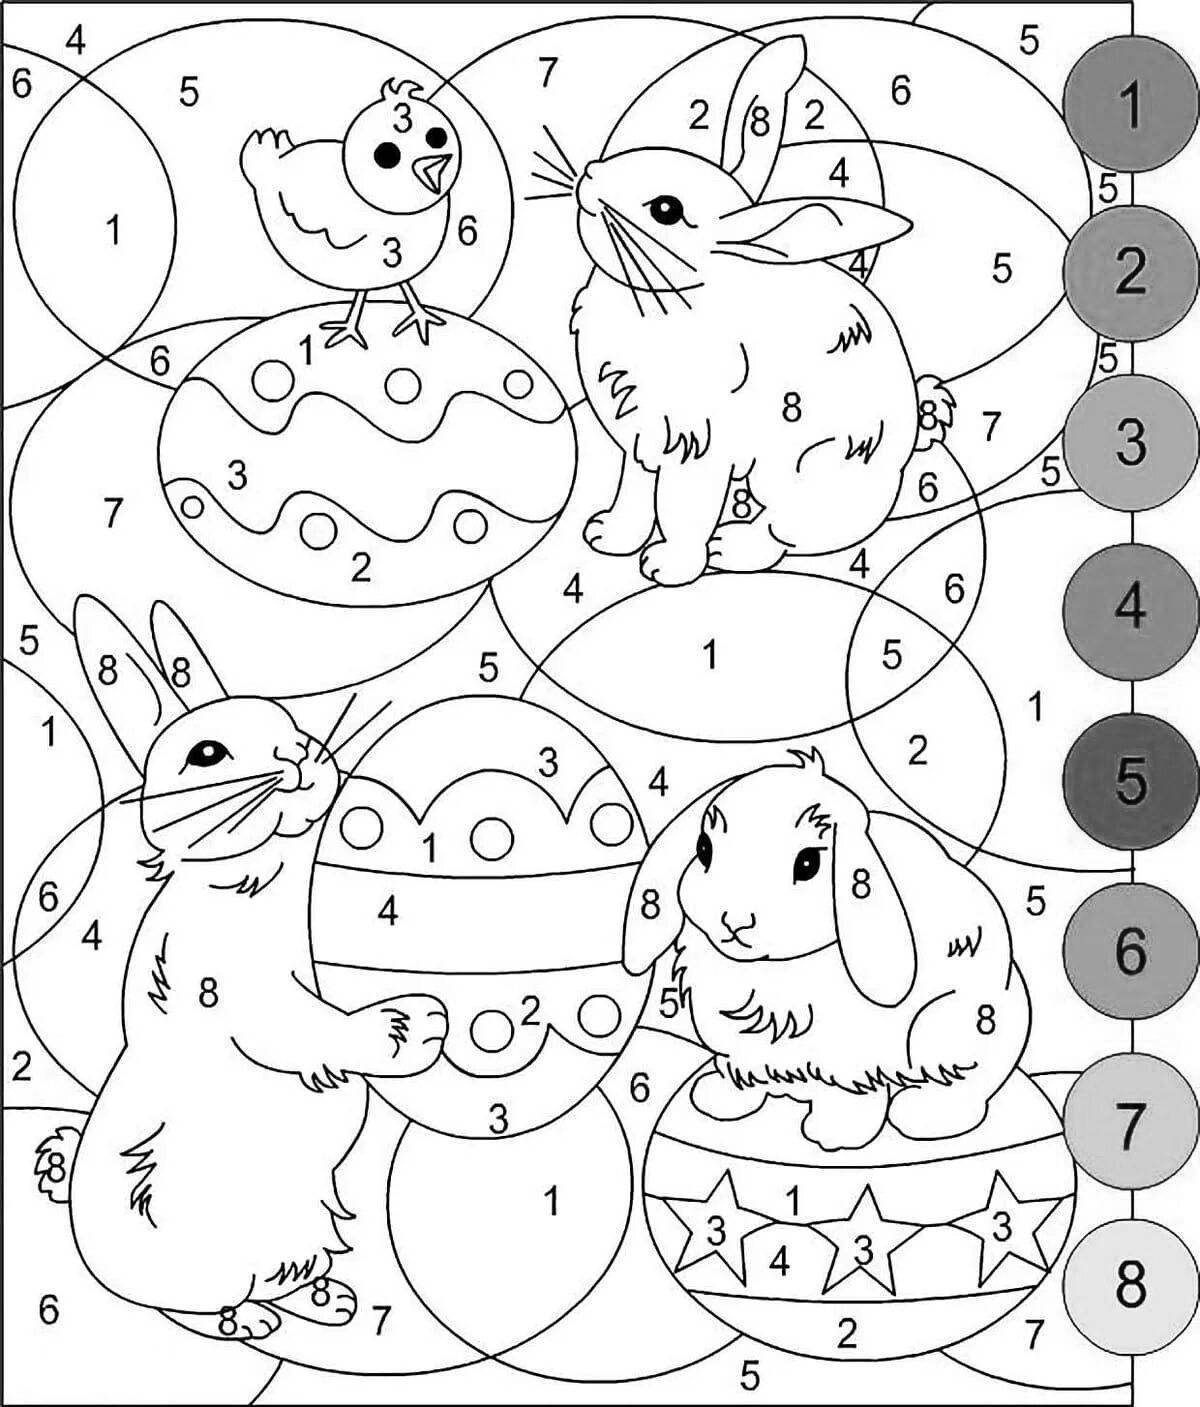 Color-lively coloring page digital for children 7 years old